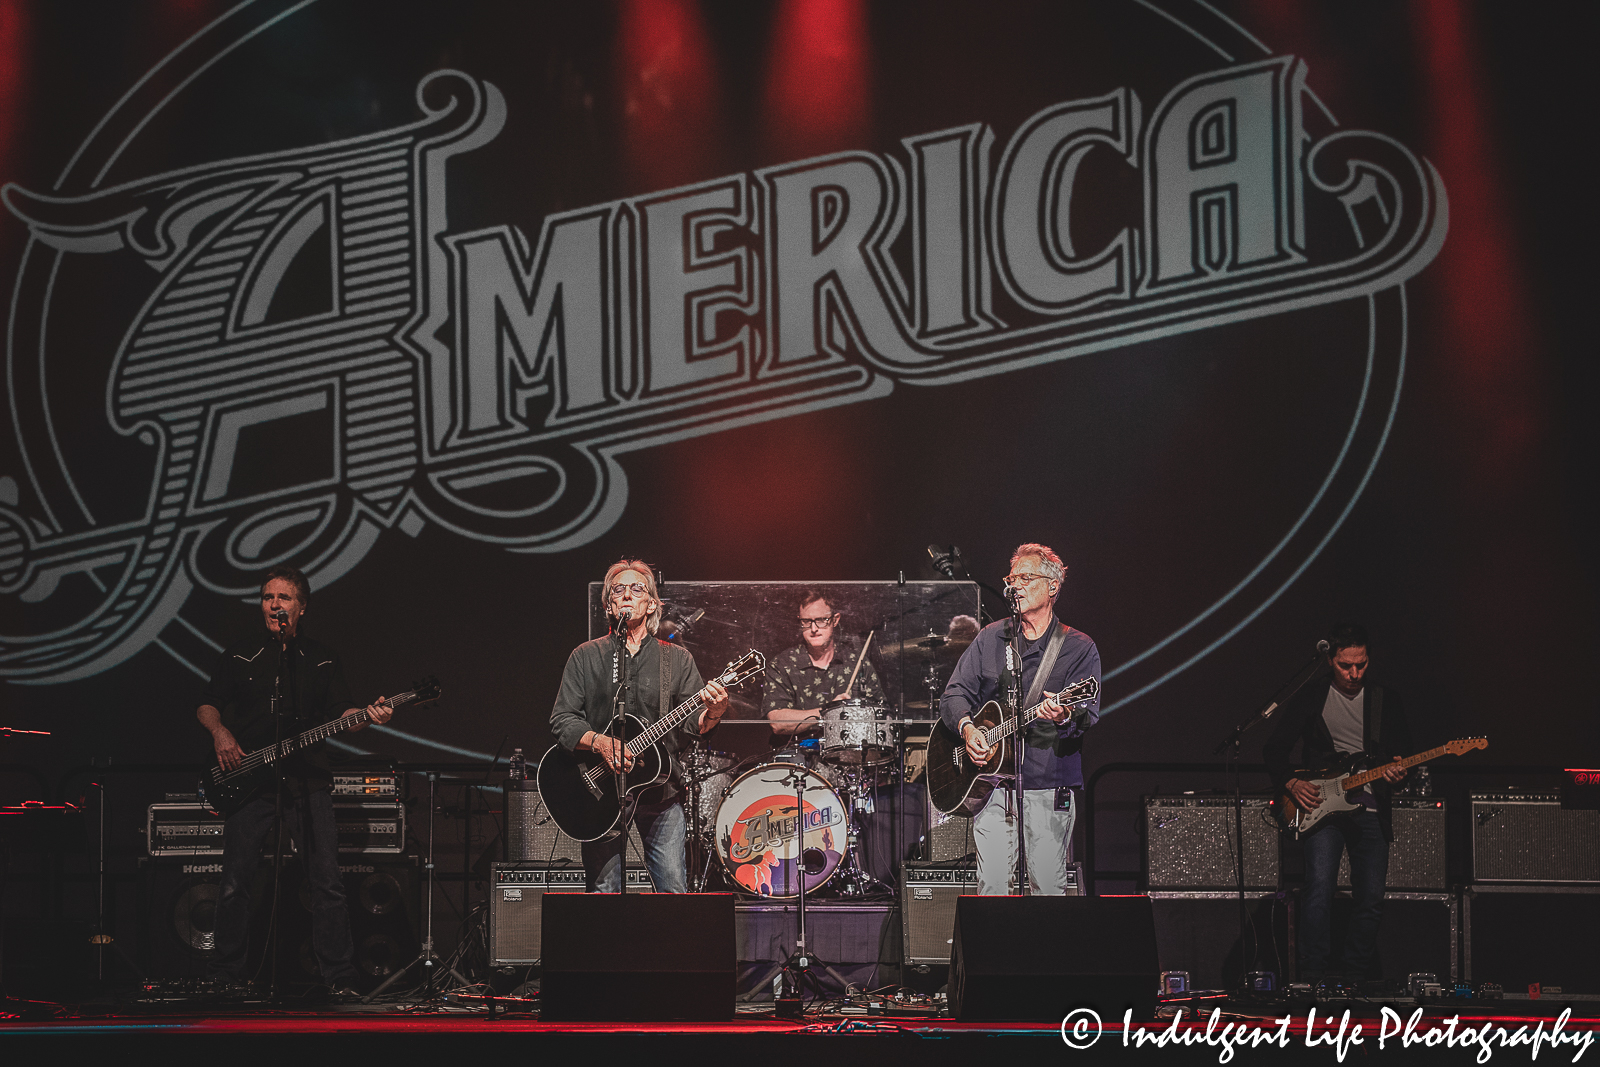 America the band performing live in concert at Ameristar Casino's Star Pavilion in Kansas City, MO on June 2, 2023.